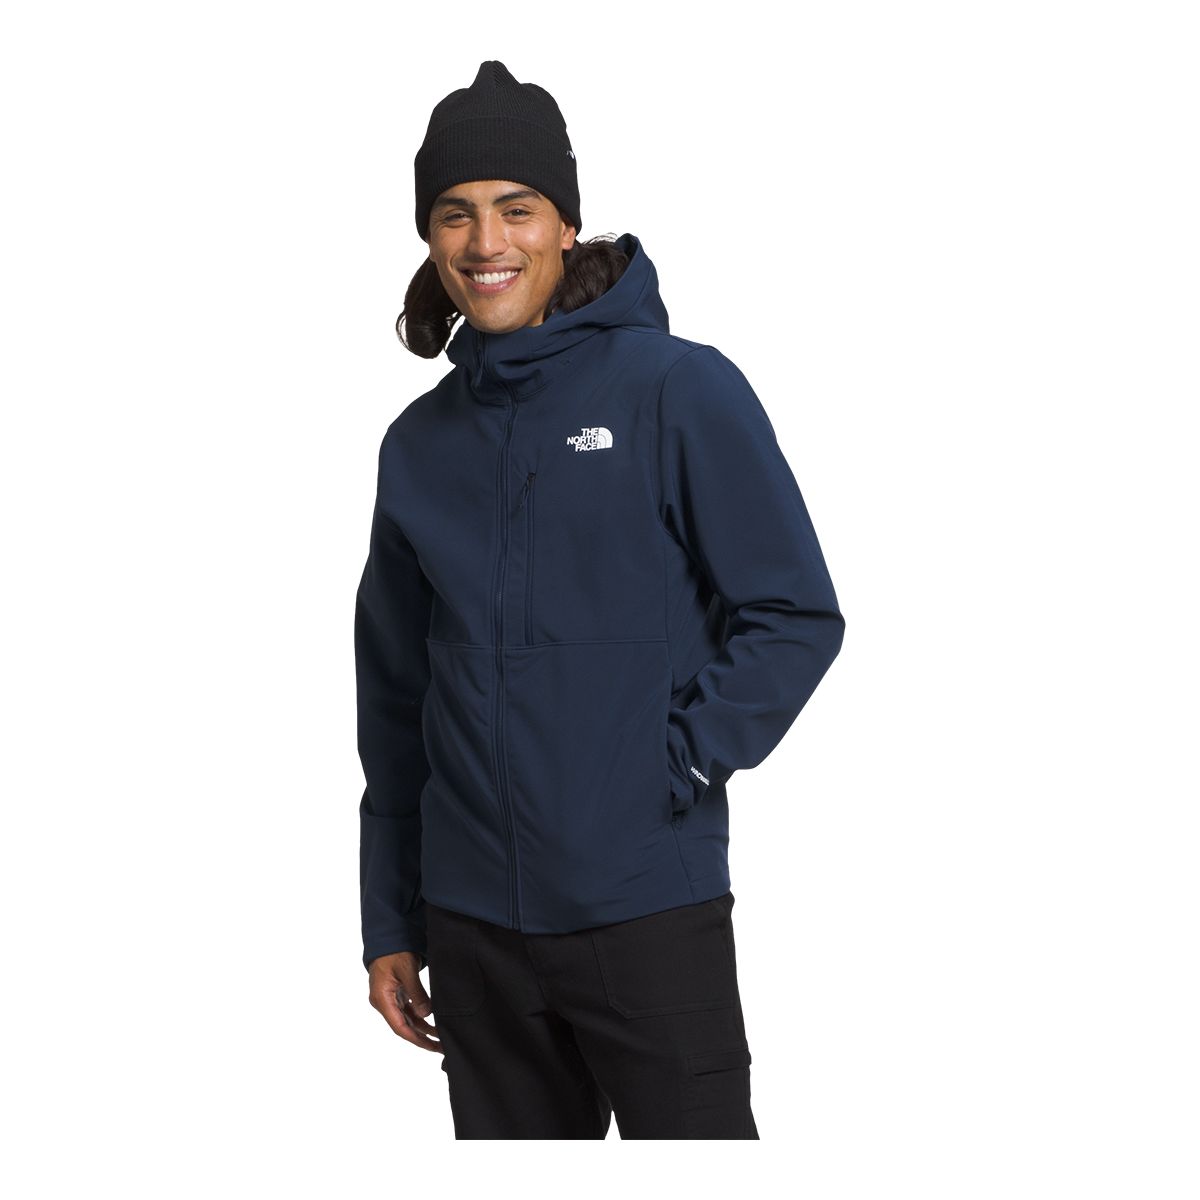 Image of The North Face Men's Apex Bionic Hooded Jacket